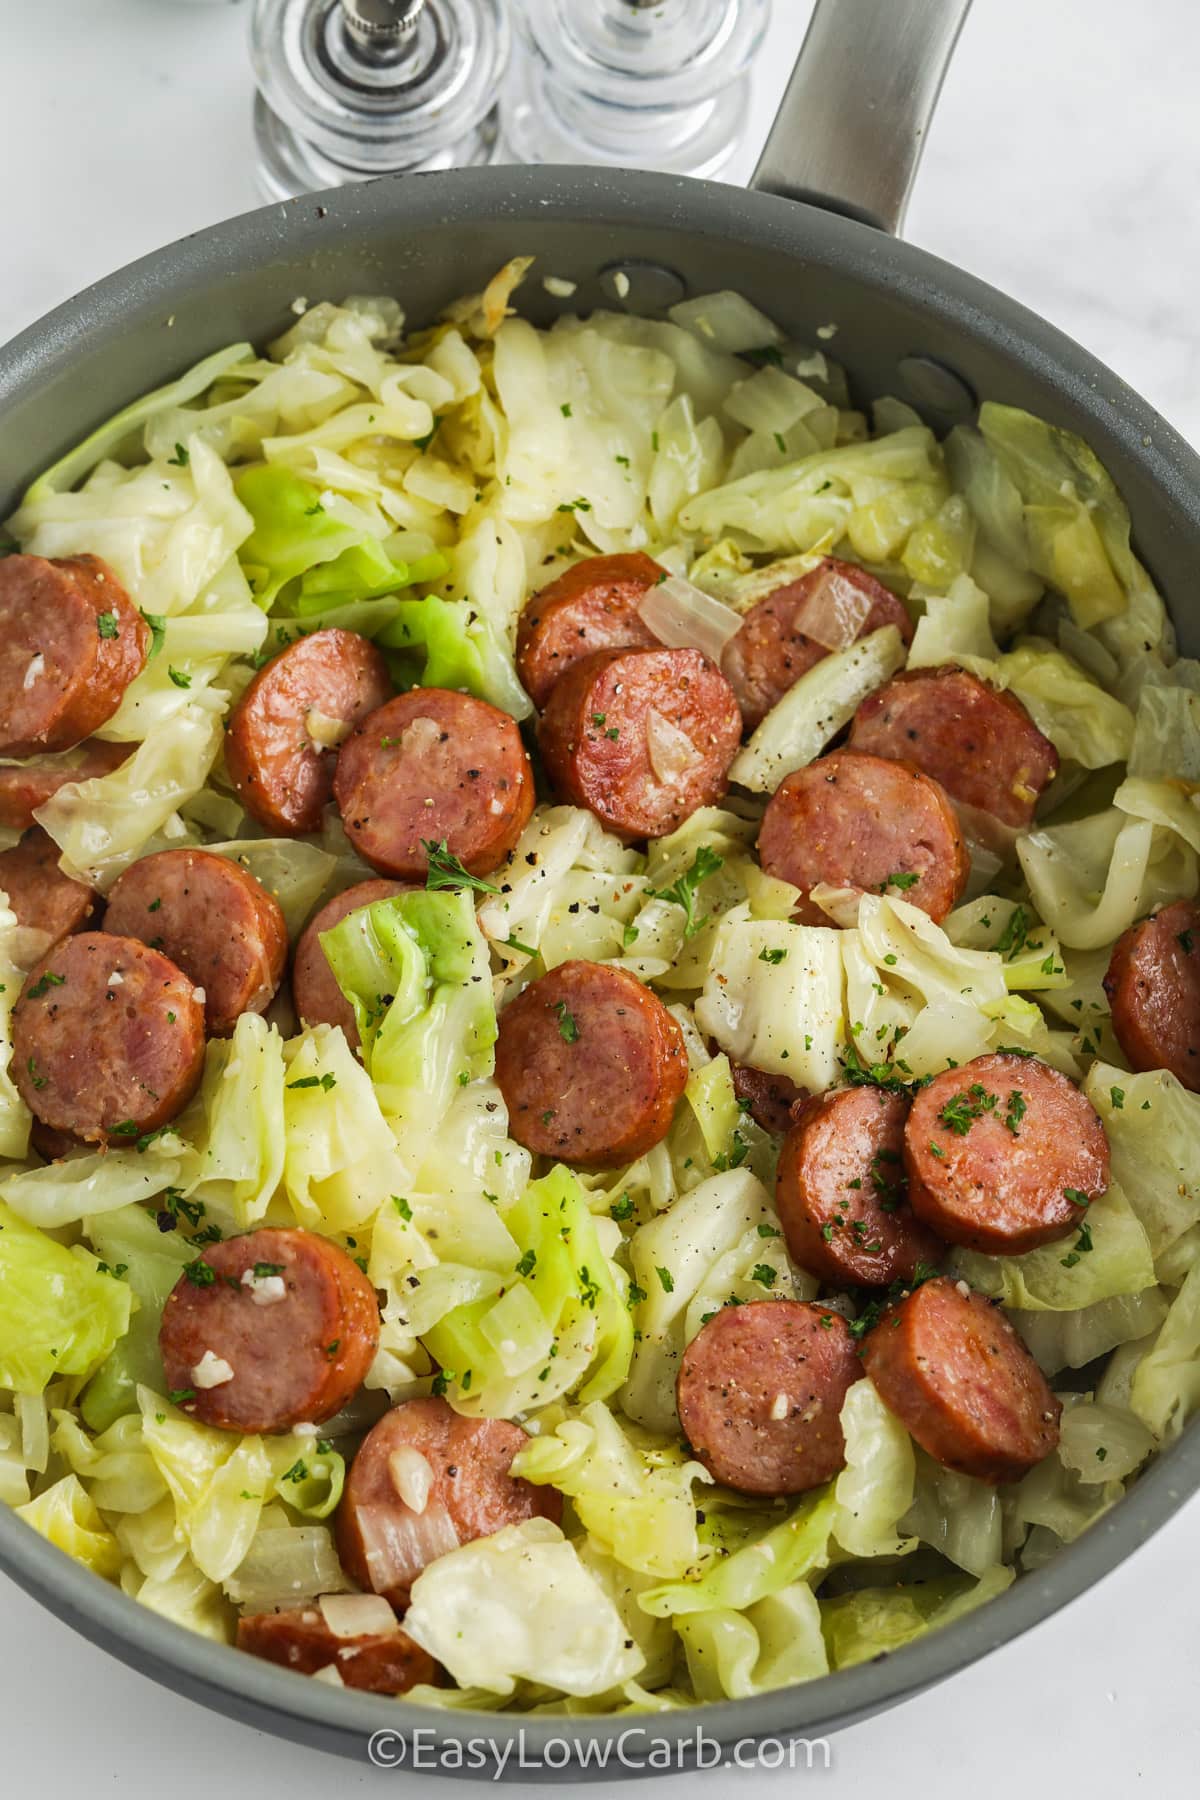 Fried Cabbage and Sausage in a skillet